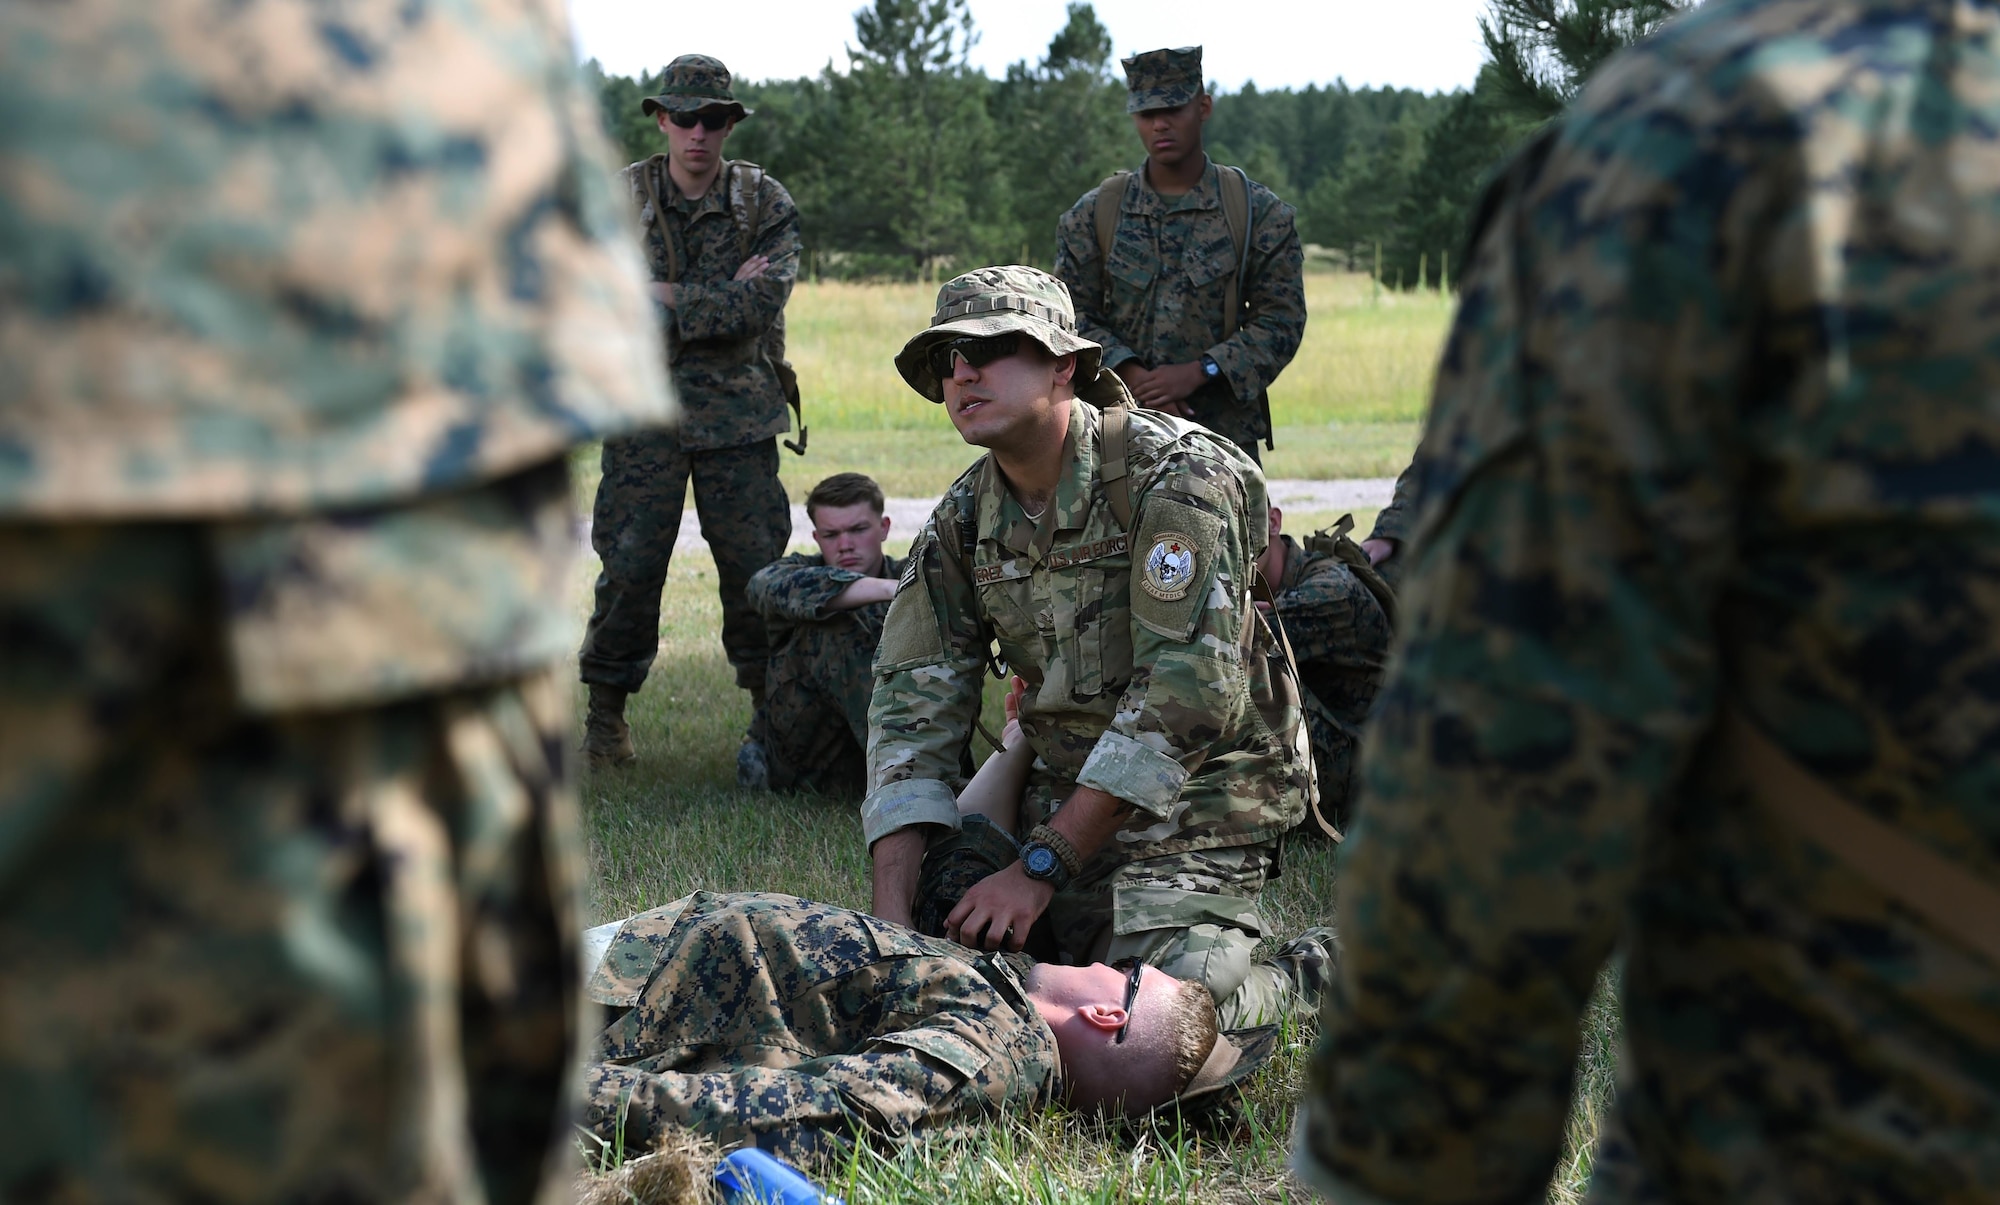 Senior Airman Ronnie Perez, 460th Medical Operations Squadron medical technician, instructs U.S. Marines, assigned to Company A, Marine Cryptologic Support Battalion, how to properly apply a tourniquet Aug 17, 2016, at the U.S. Air Force Academy, Colo. Perez volunteered to join the battalion for their summer field training to teach basic life-saving skills service members must know prior to being deployed. (U.S. Air Force photo by Airman Holden S. Faul/ Released)